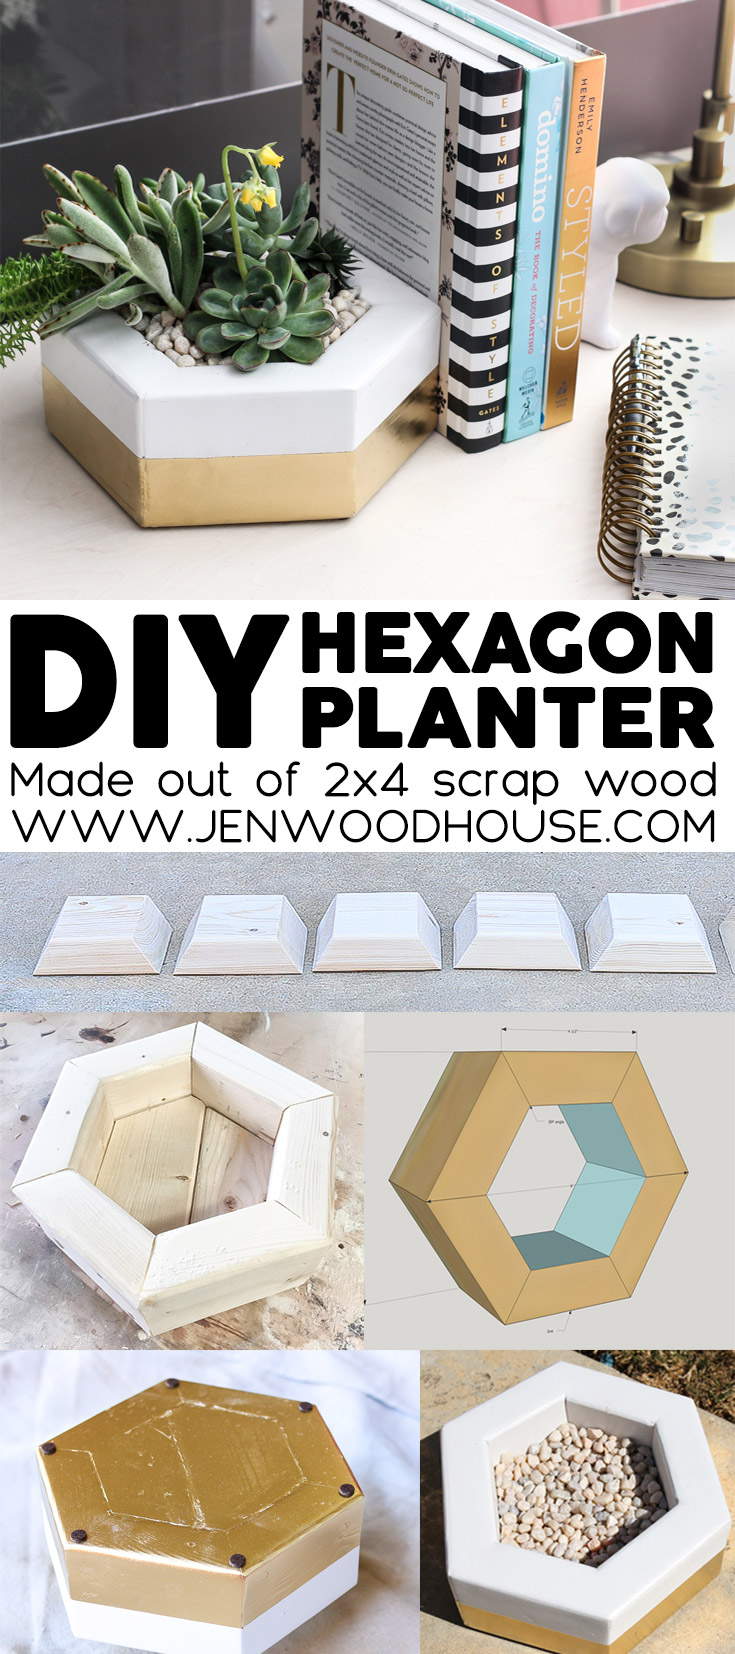 How to make a DIY hexagon planter out of 2x4 scrap wood | www.jenwoodhouse.com